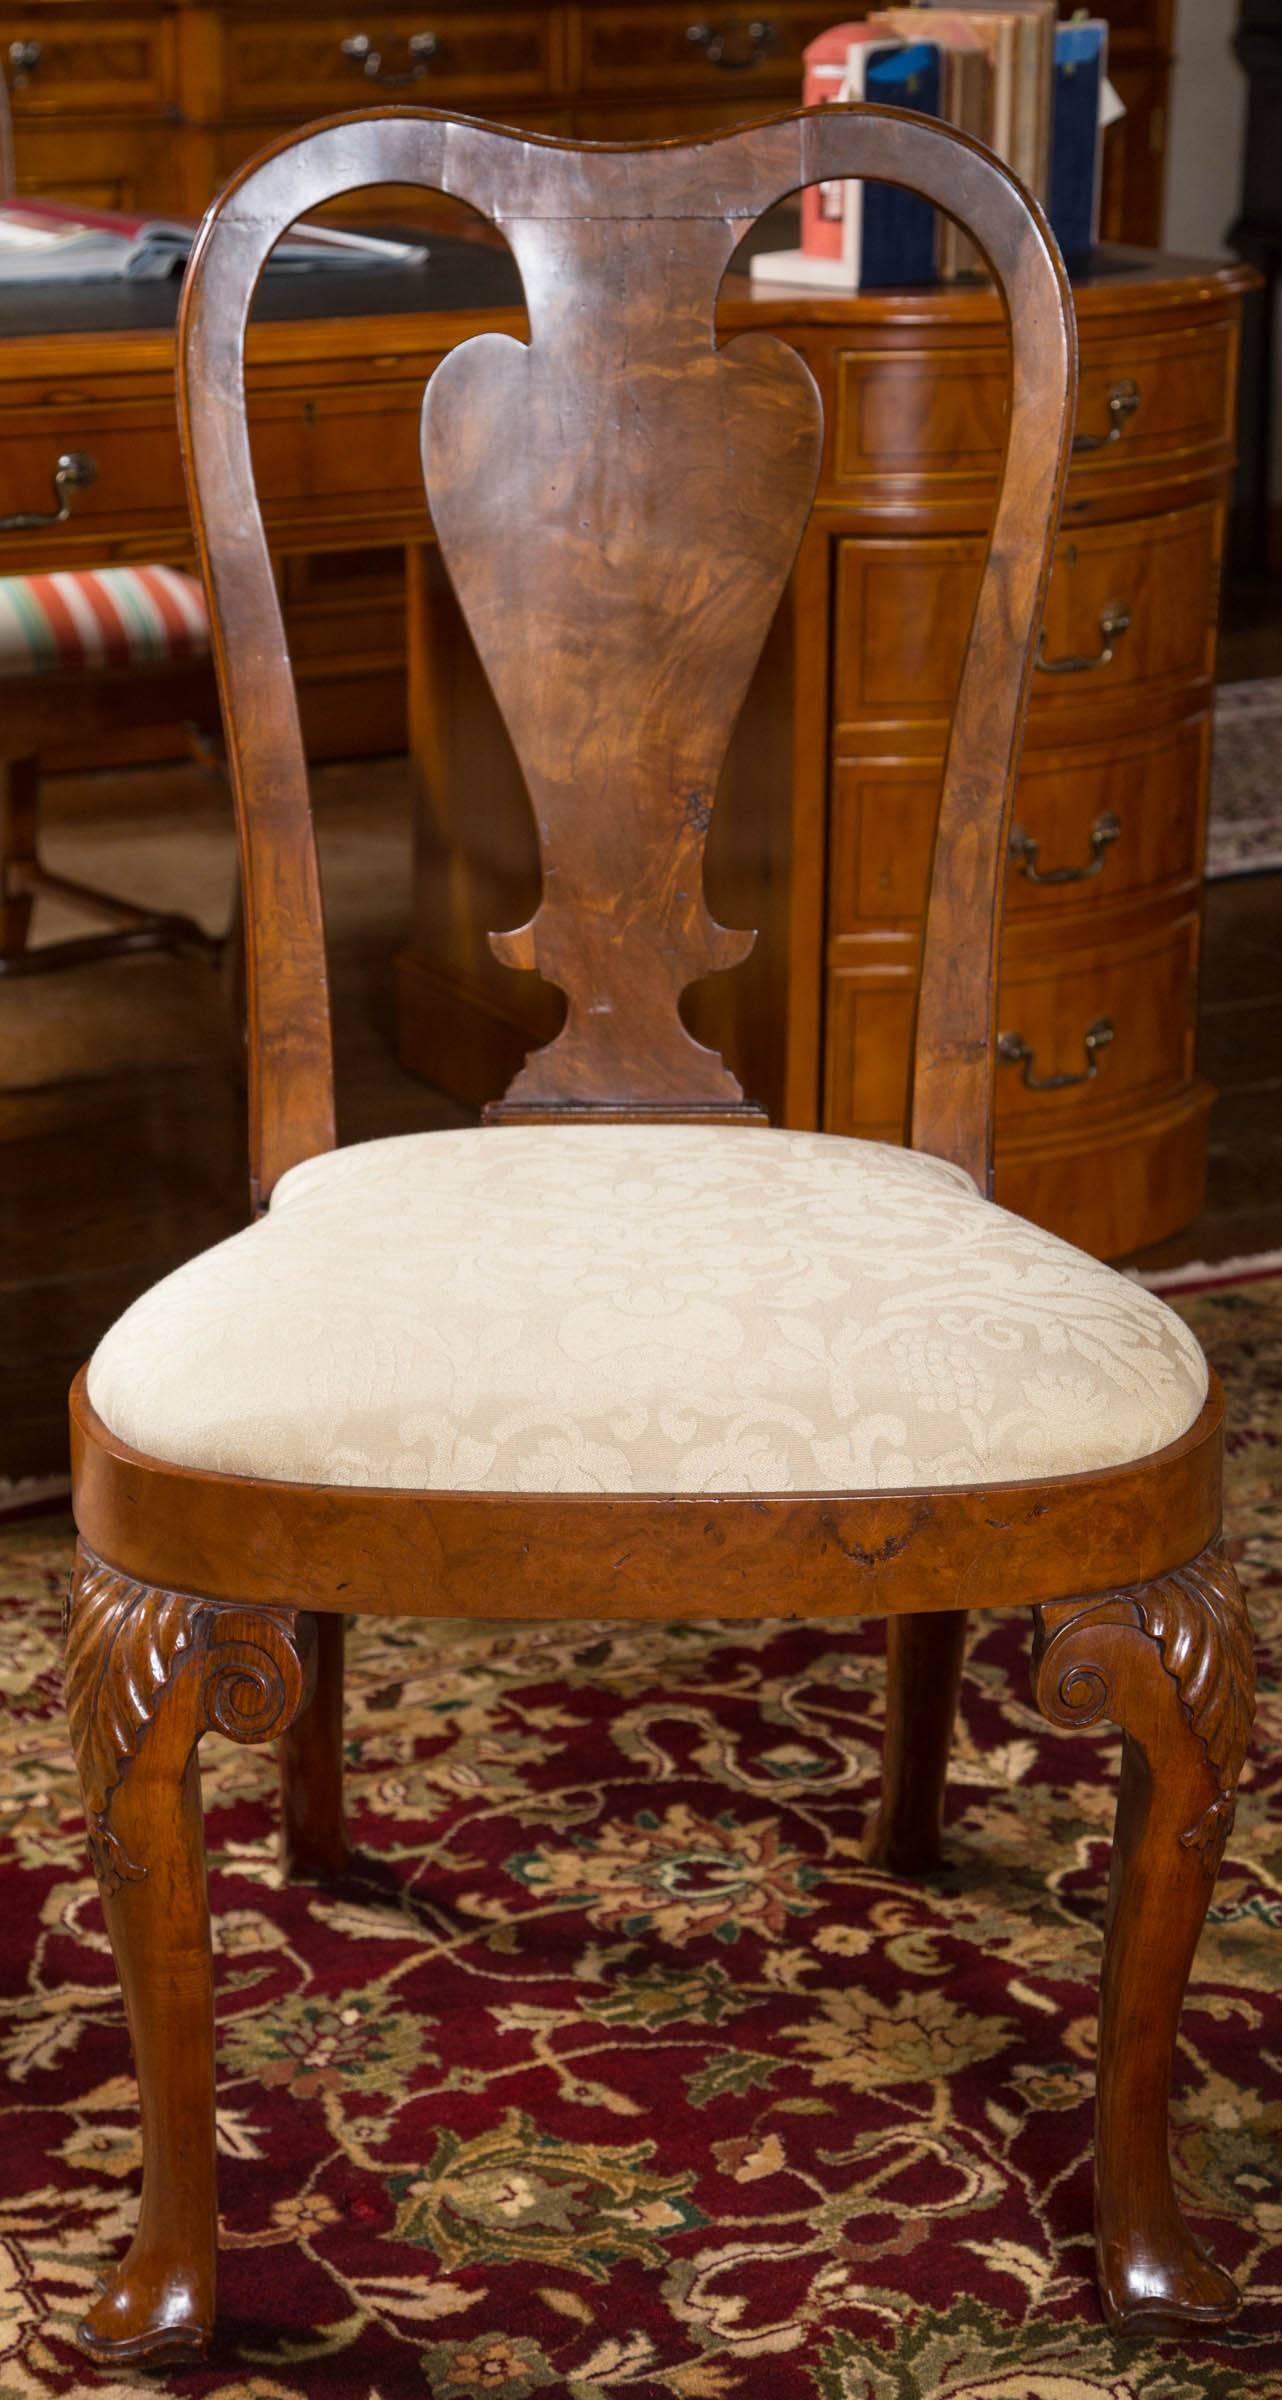 Rare set of six George II dining chairs in figured walnut. Following the classic Queen Anne style, these are clearly Georgian chairs with the shorter backs and flat uprights and splat while the legs are minus the stretchers often associated with the